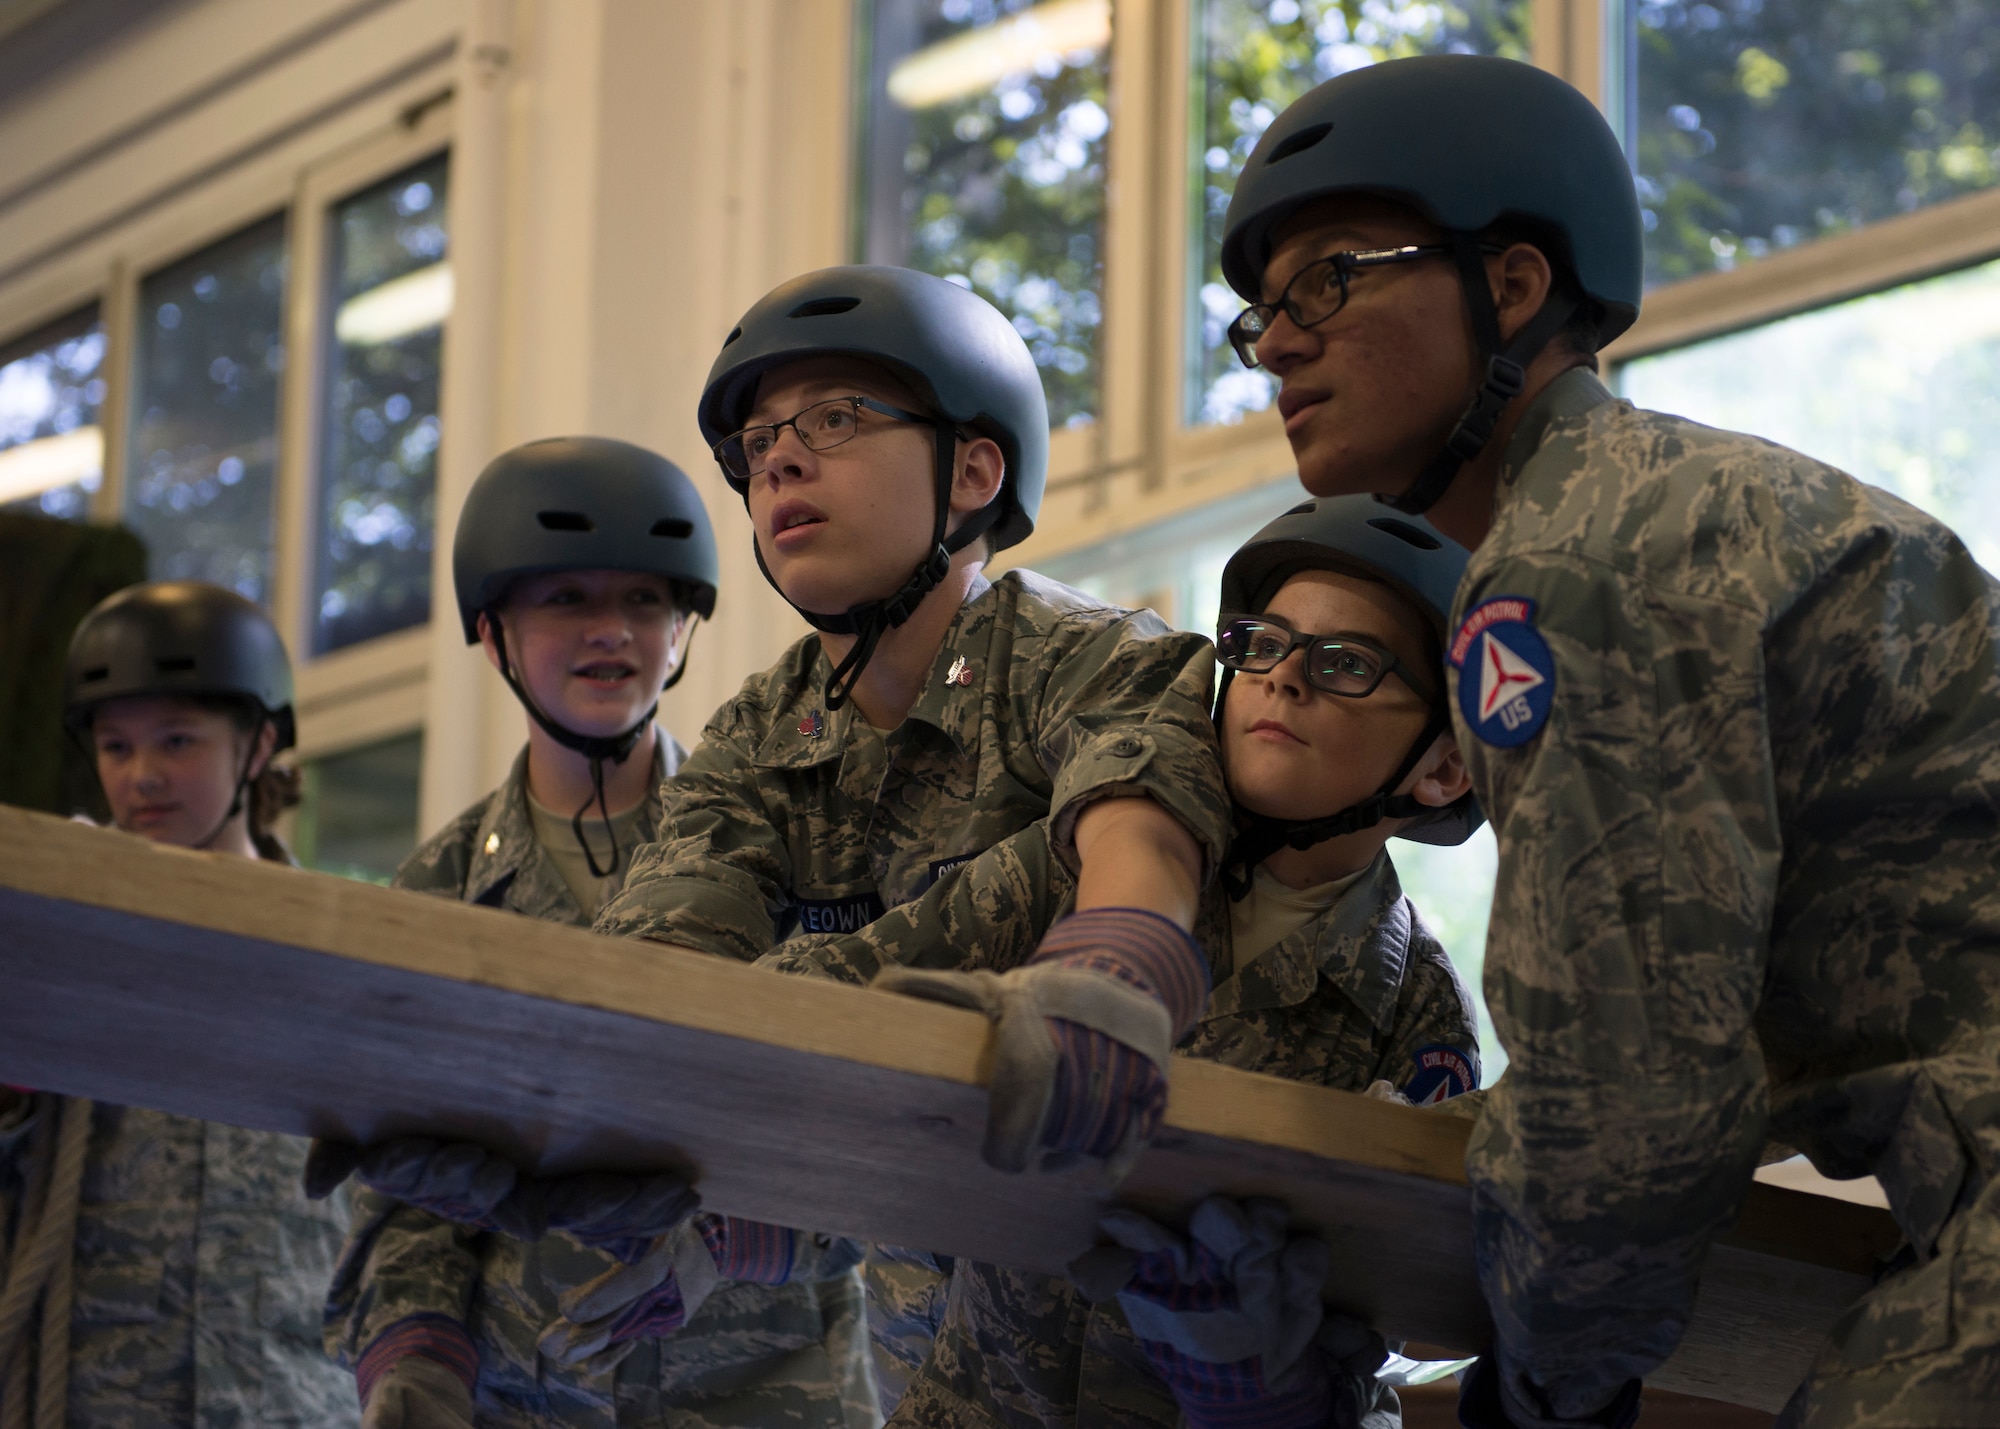 U.S. Civil Air Patrol cadets work together to balance a plank of wood during a team-building activity August 1, 2019, at Kapaun Air Station, Germany. The 2019 European Summer Encampment is the largest overseas encampment held so far, hosting cadet Airmen from states such as Alaska to countries such as the United Kingdom.